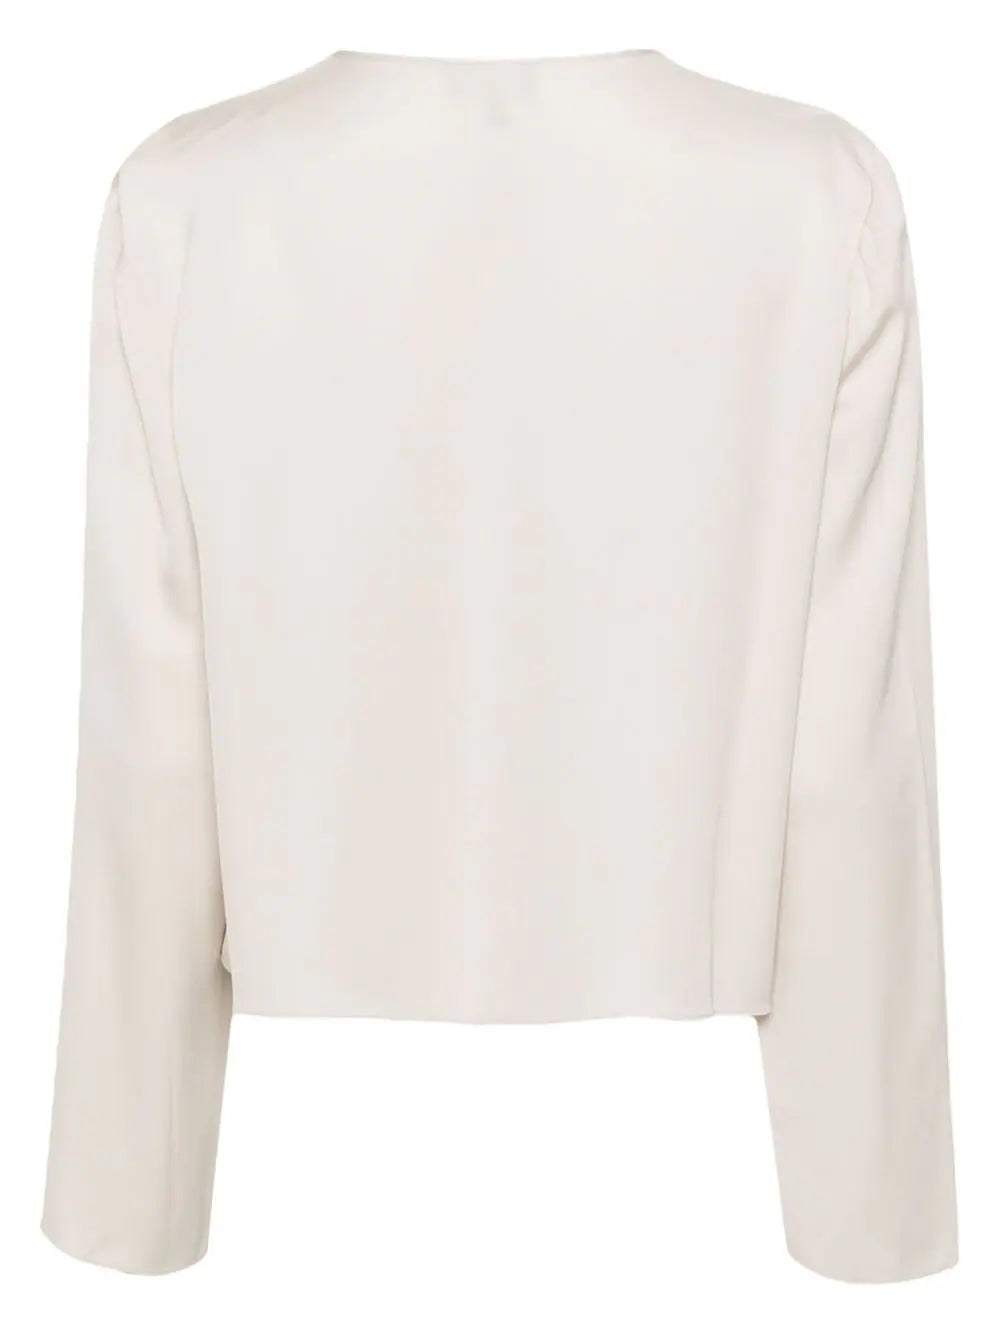 Theory tie V-neck crop blouse